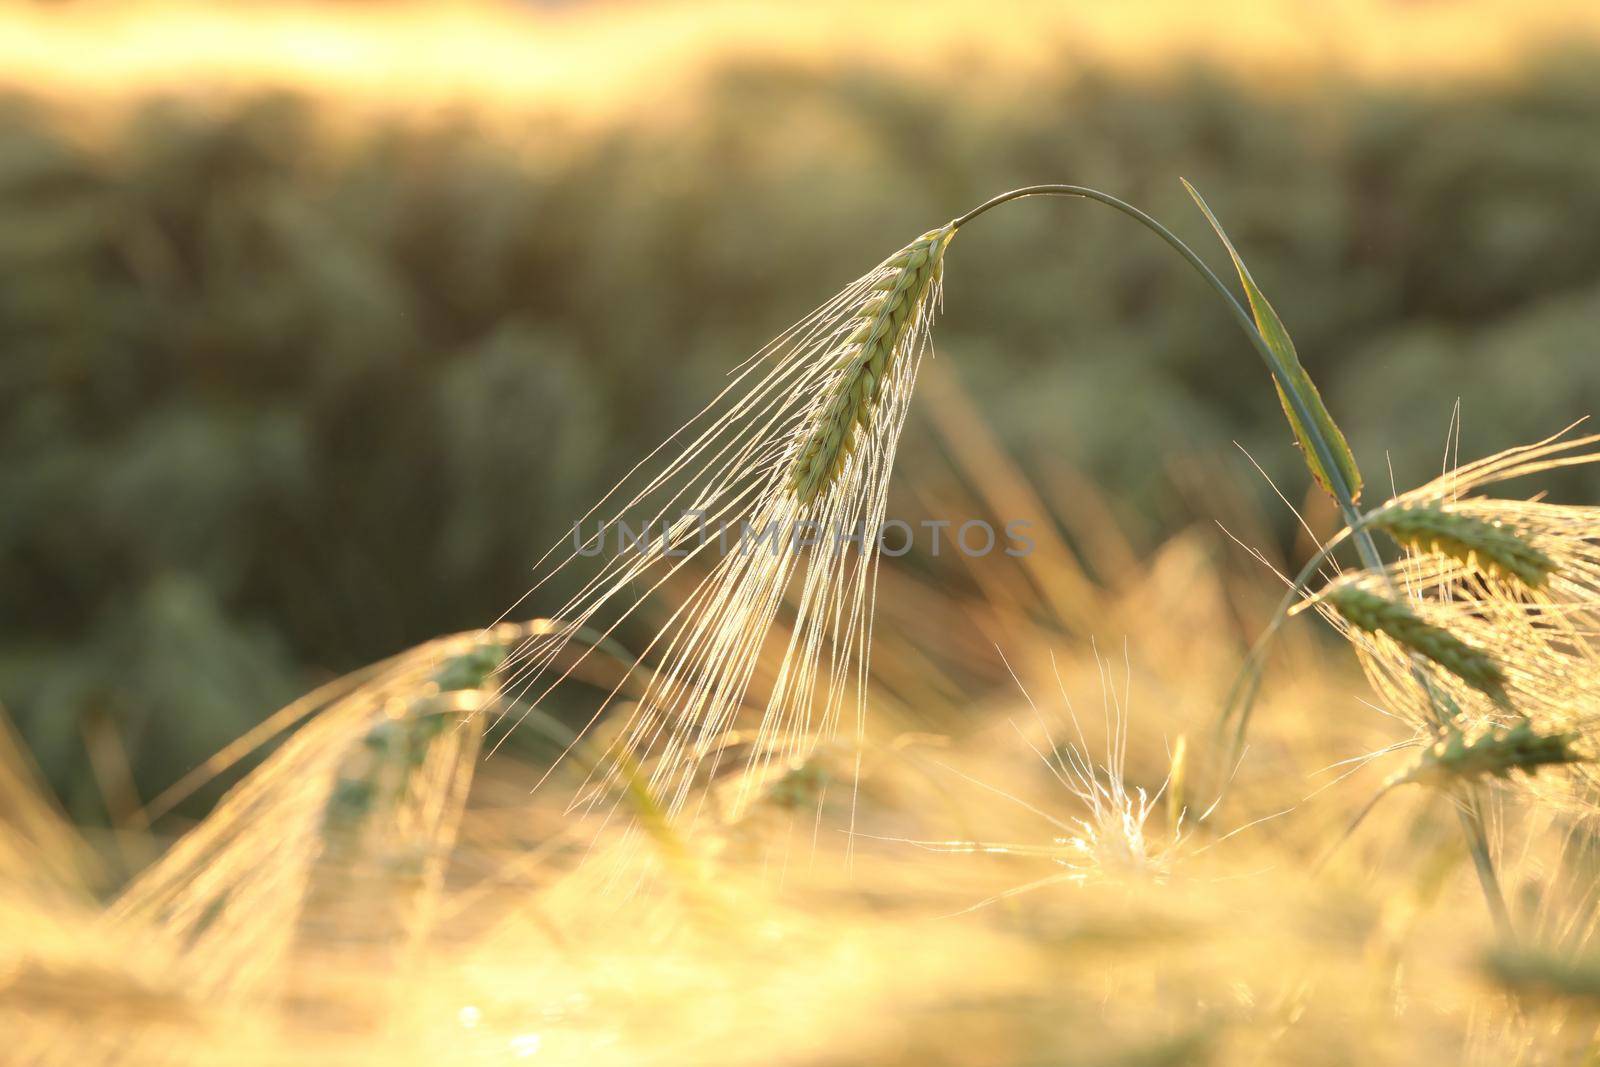 Ear of wheat in the field at dusk.